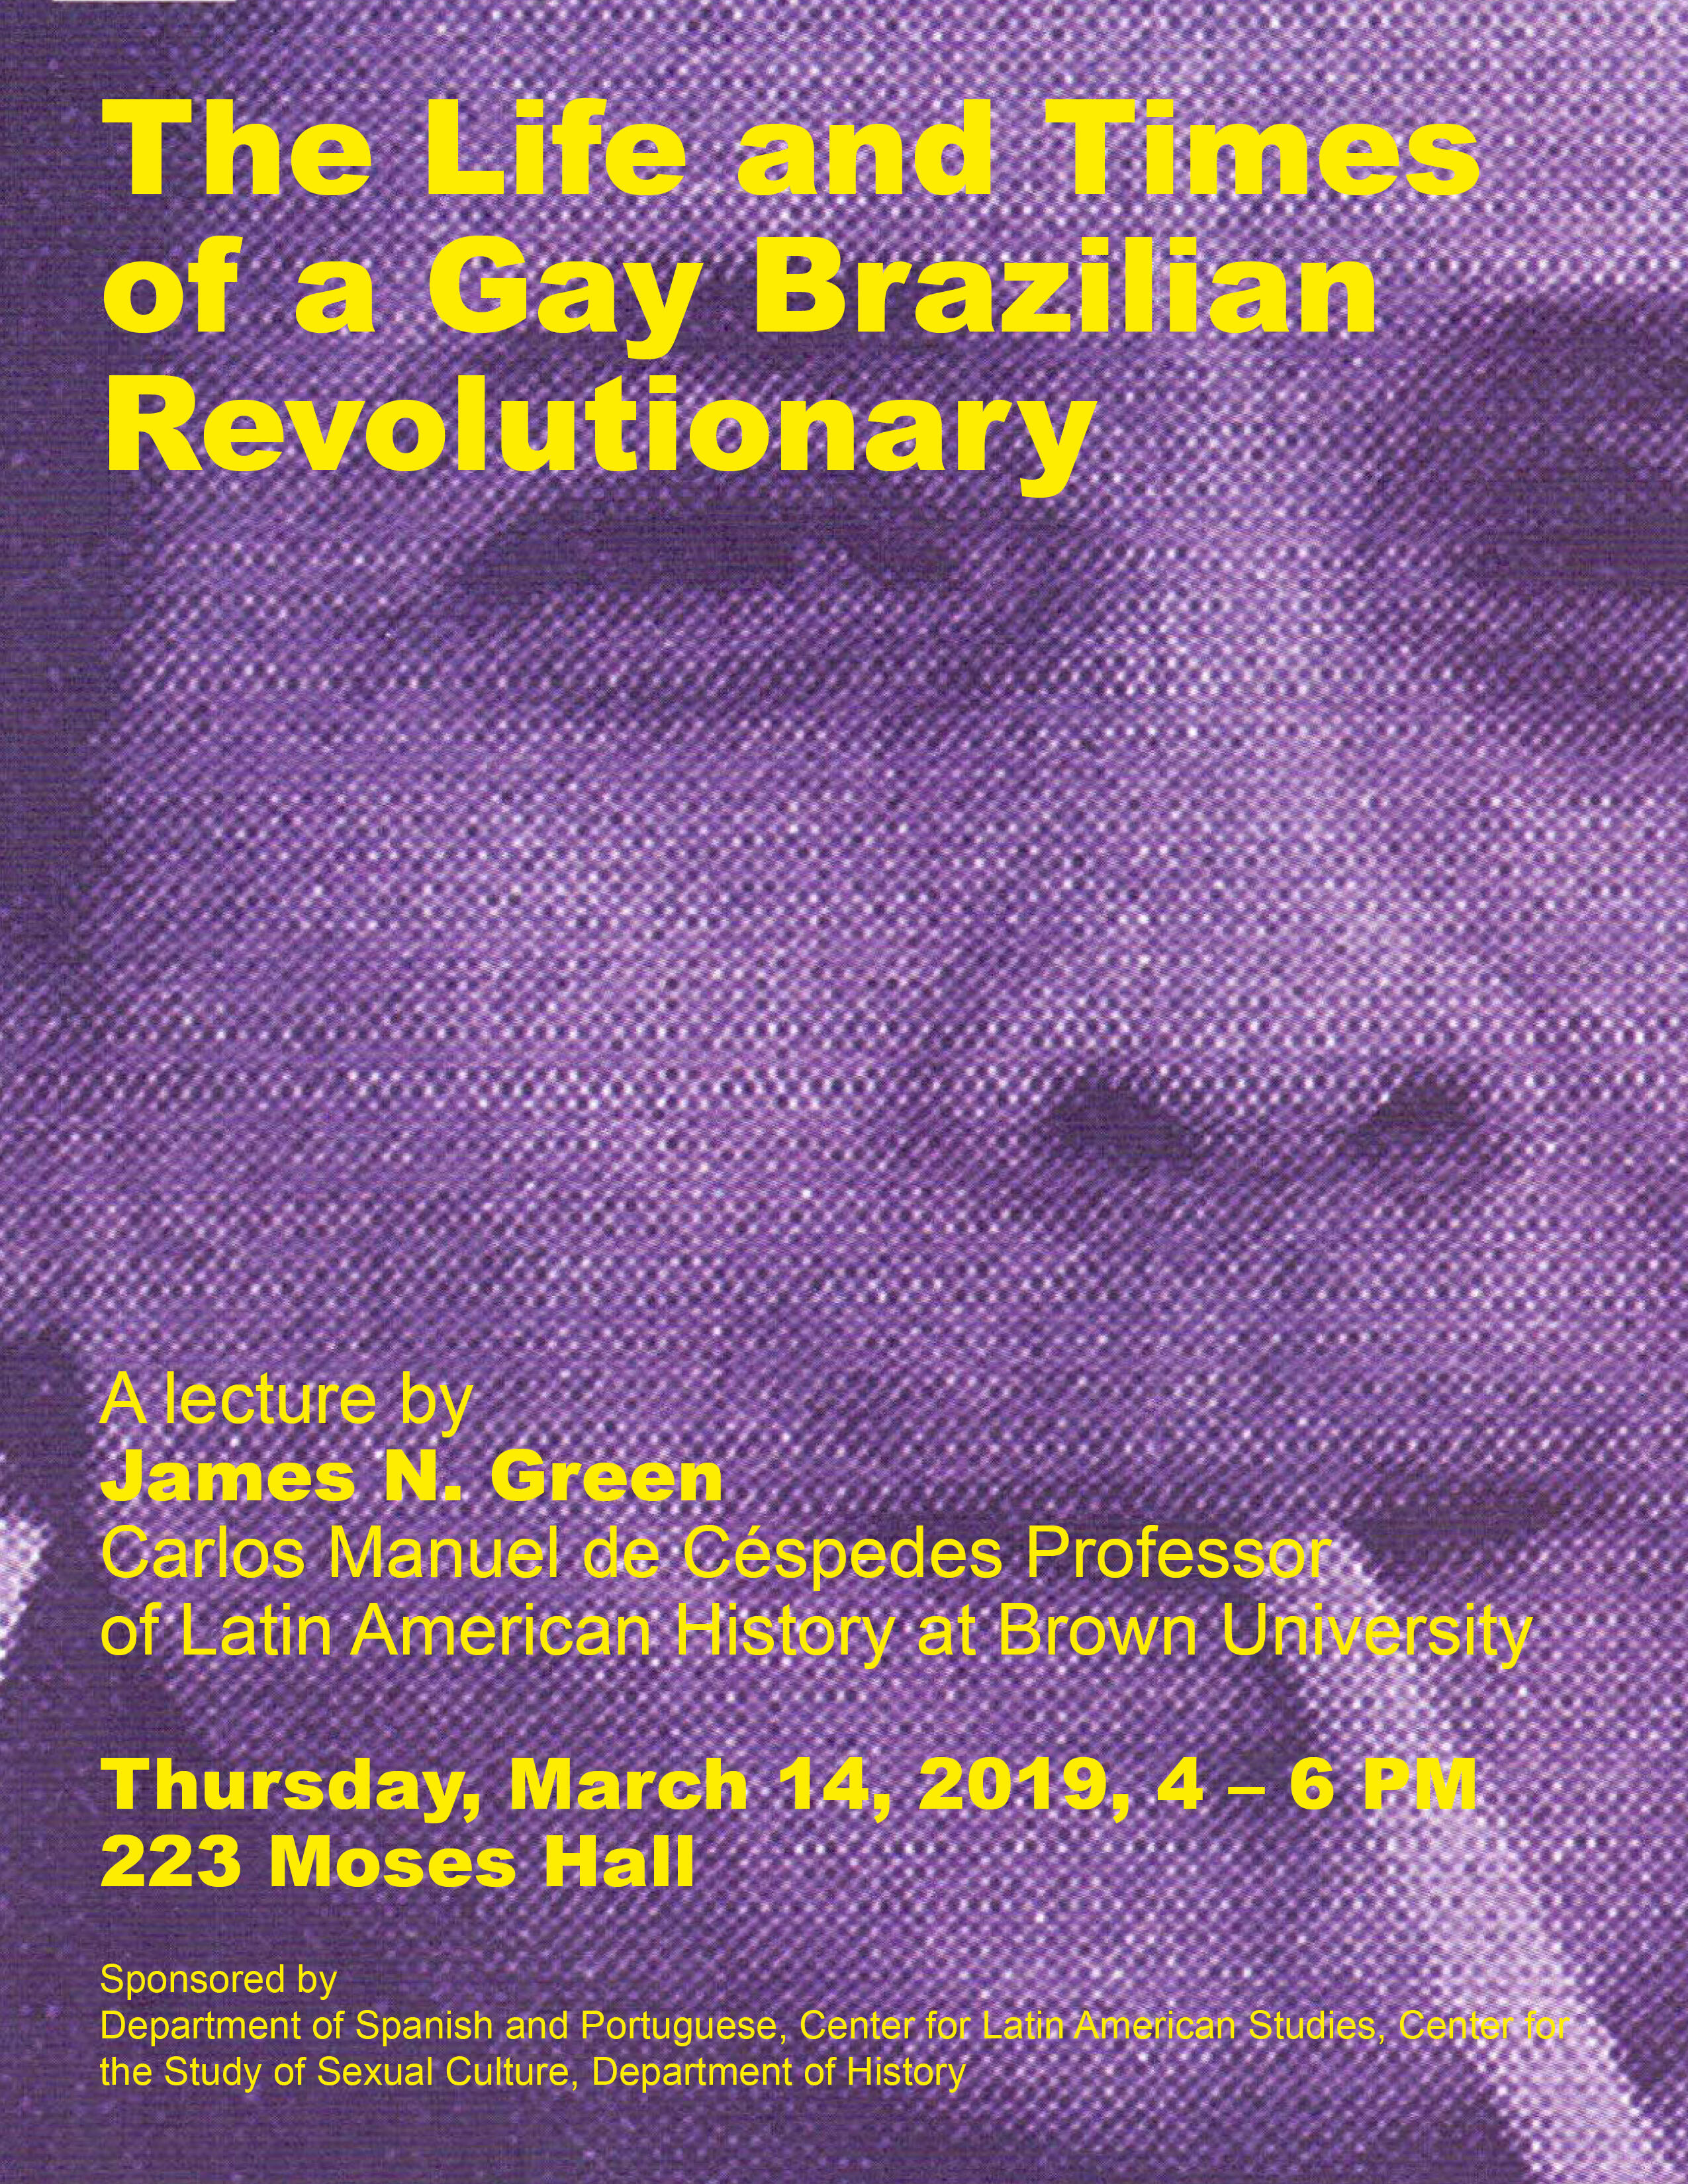 Lecture by James Green, “The Life and Times of a Gay Brazilian Revolutionary”